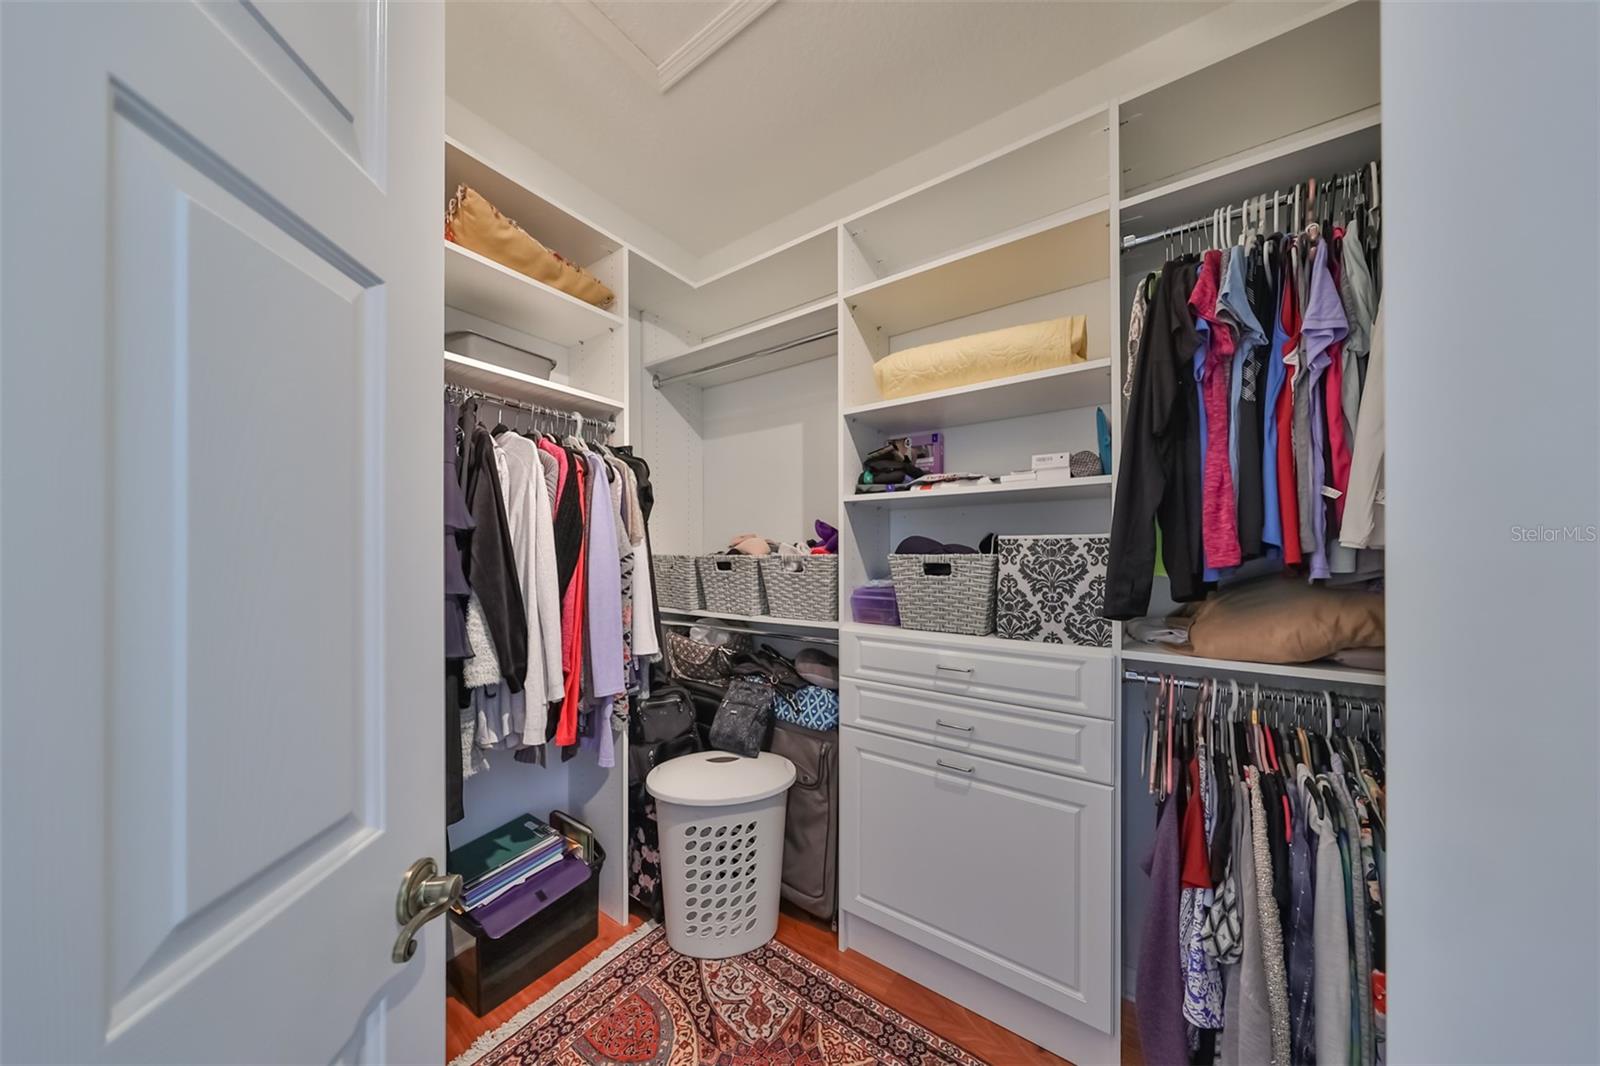 Large walk-in closet with California style shelving.